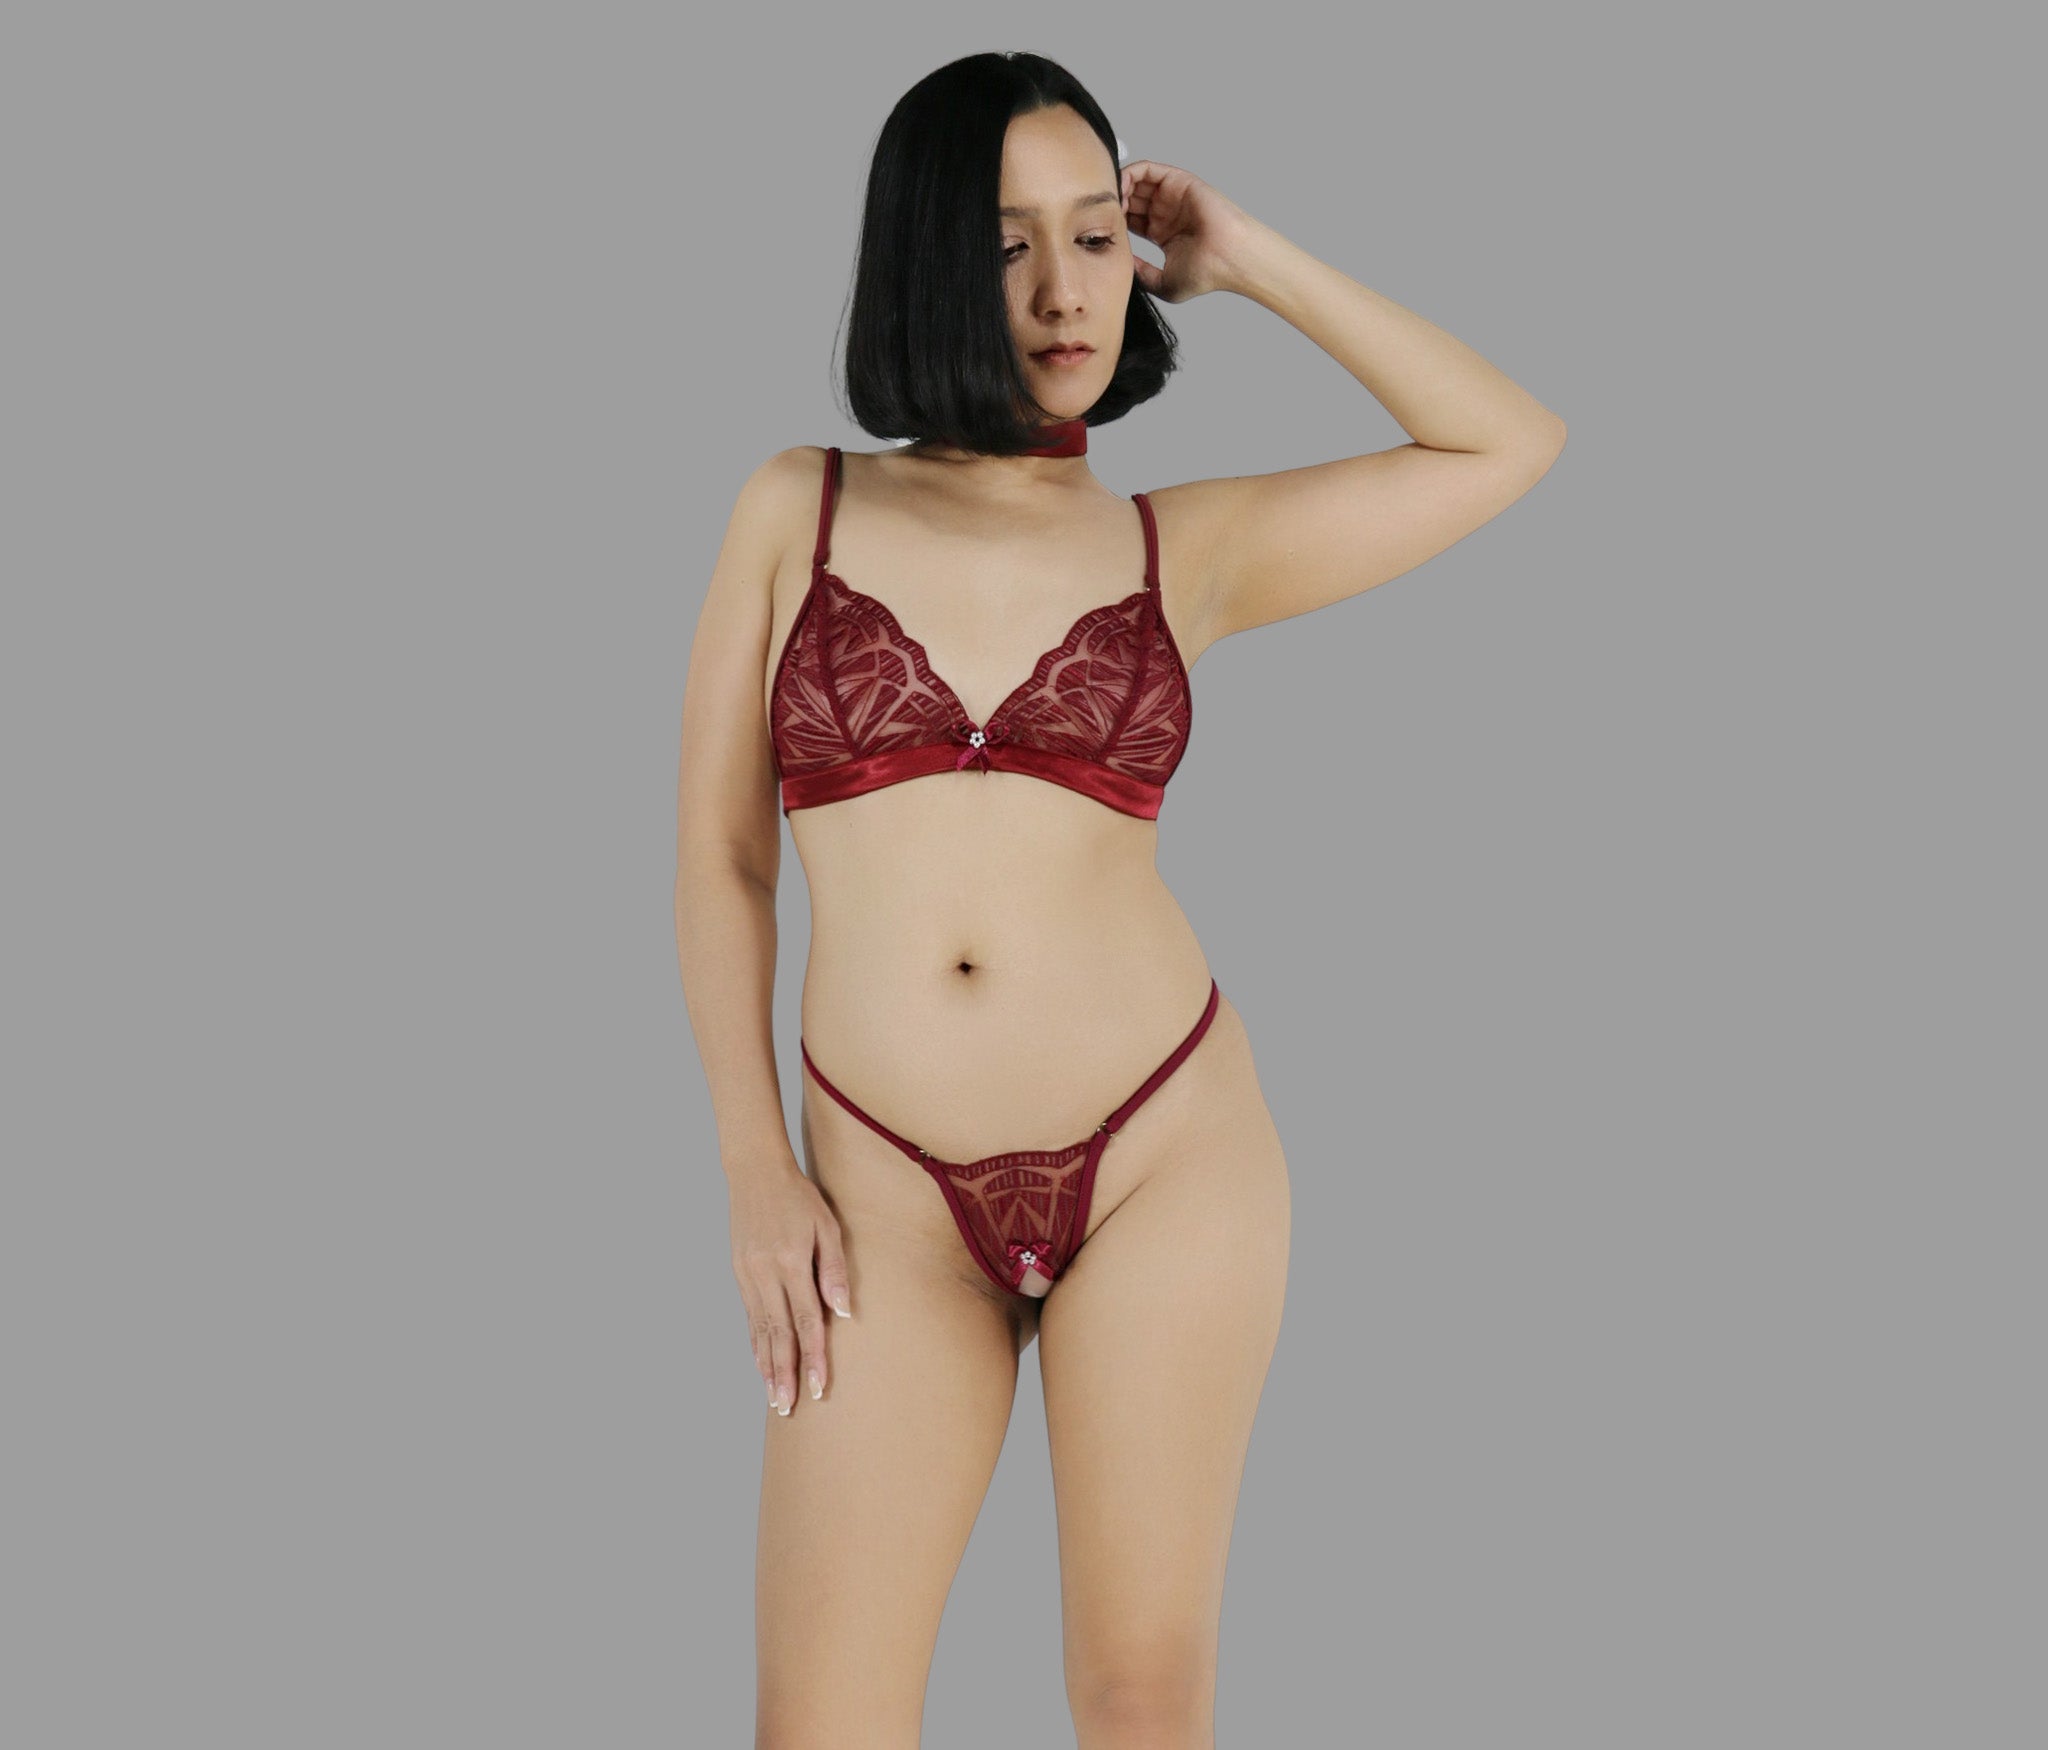 Sexy lingerie set with crotchless G string panties in see through burgundy red lace sexy sheer boudoir lingerie - Ange Déchu